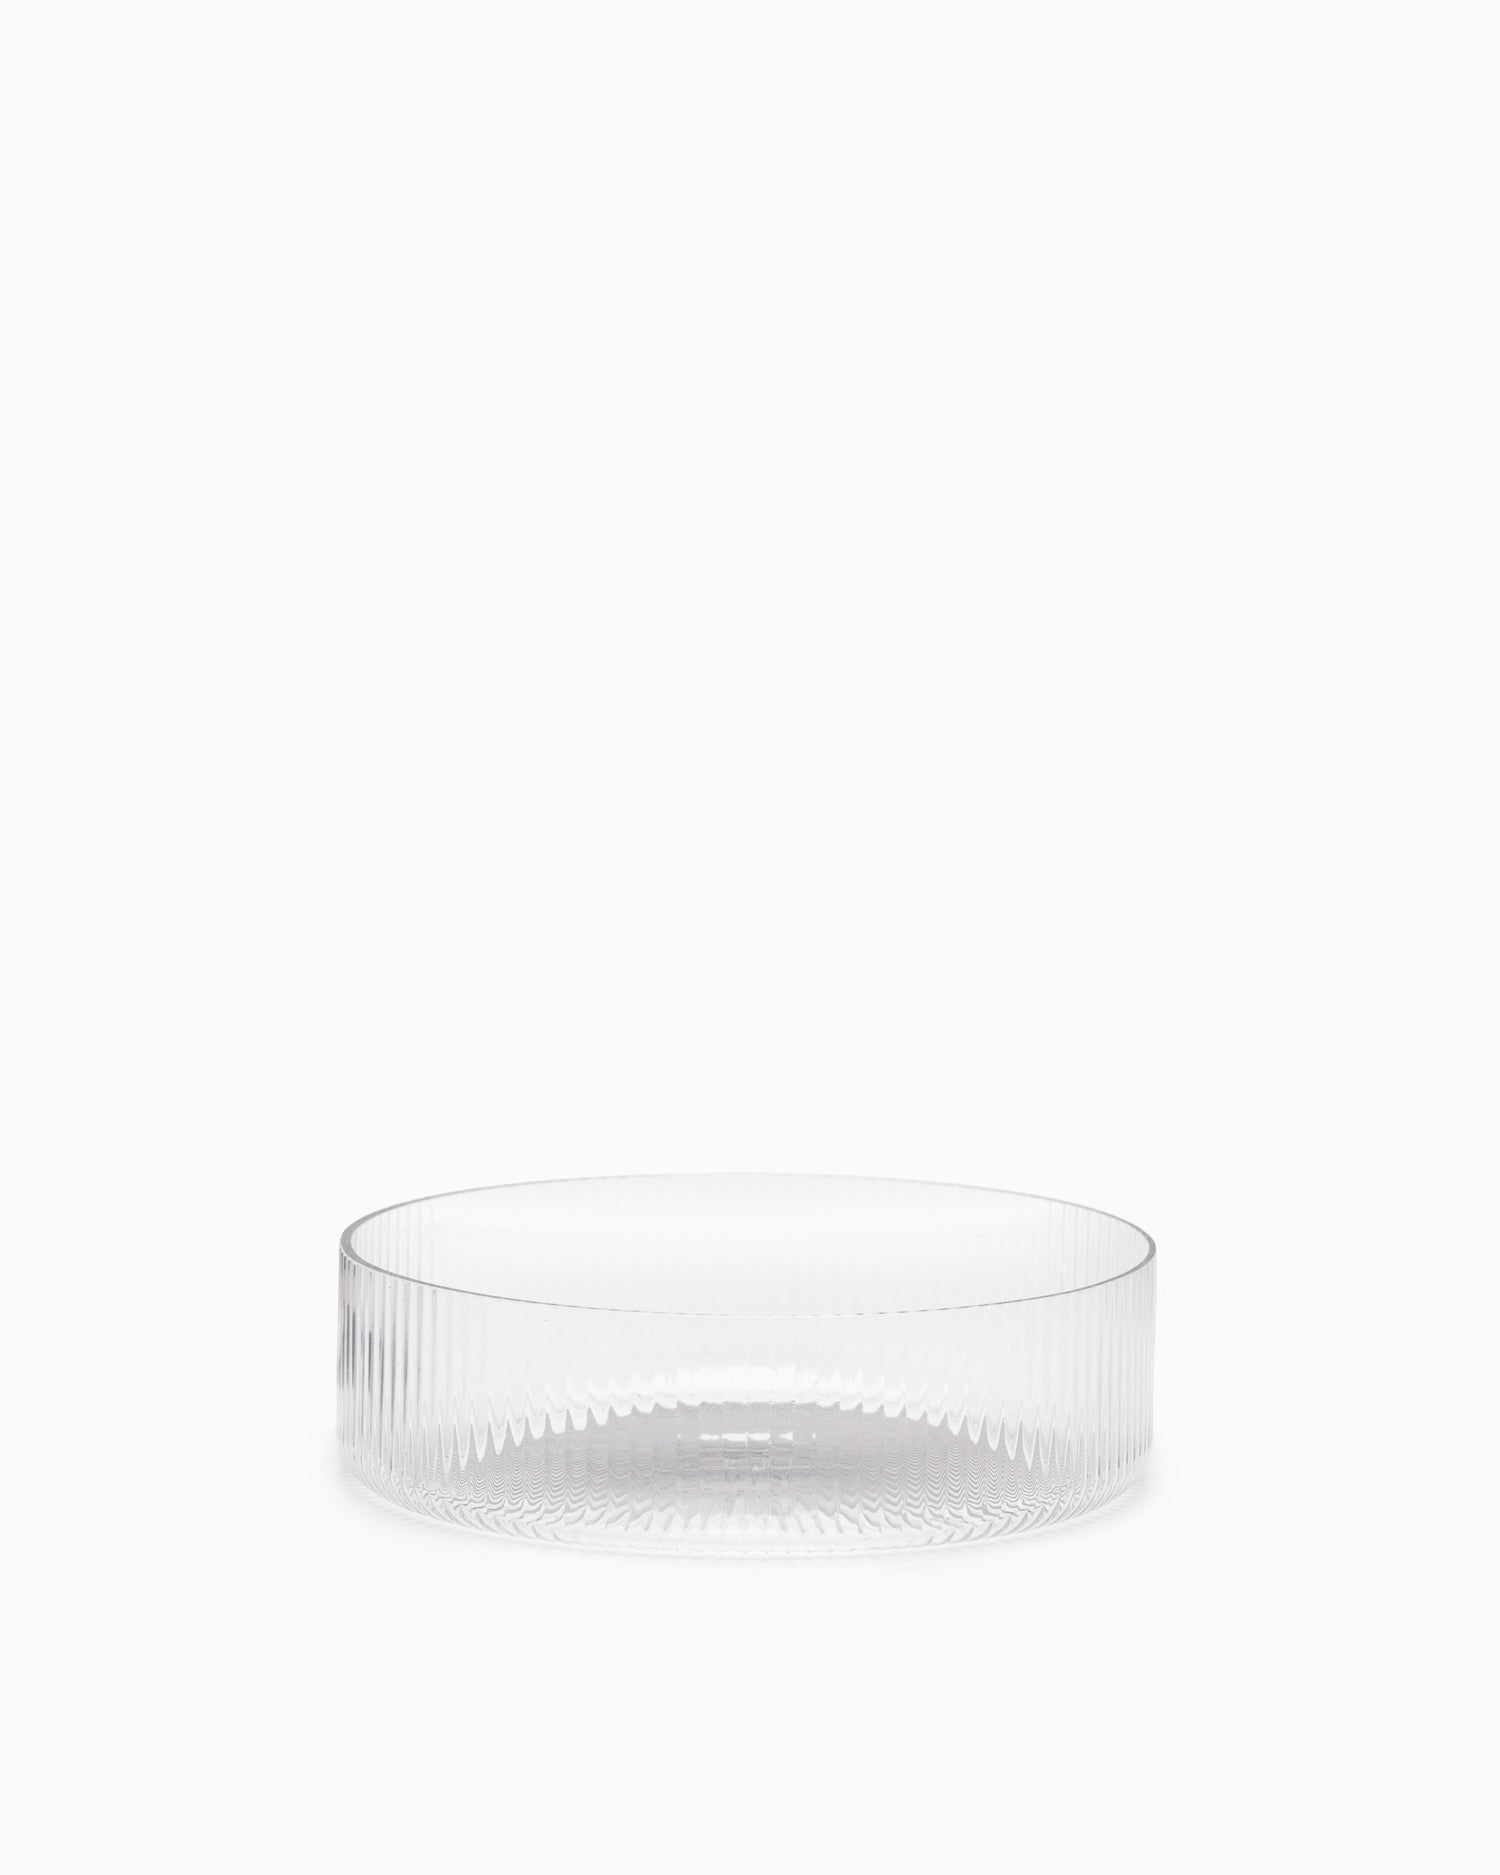 Ripple Serving Bowls - Set 4 of Clear